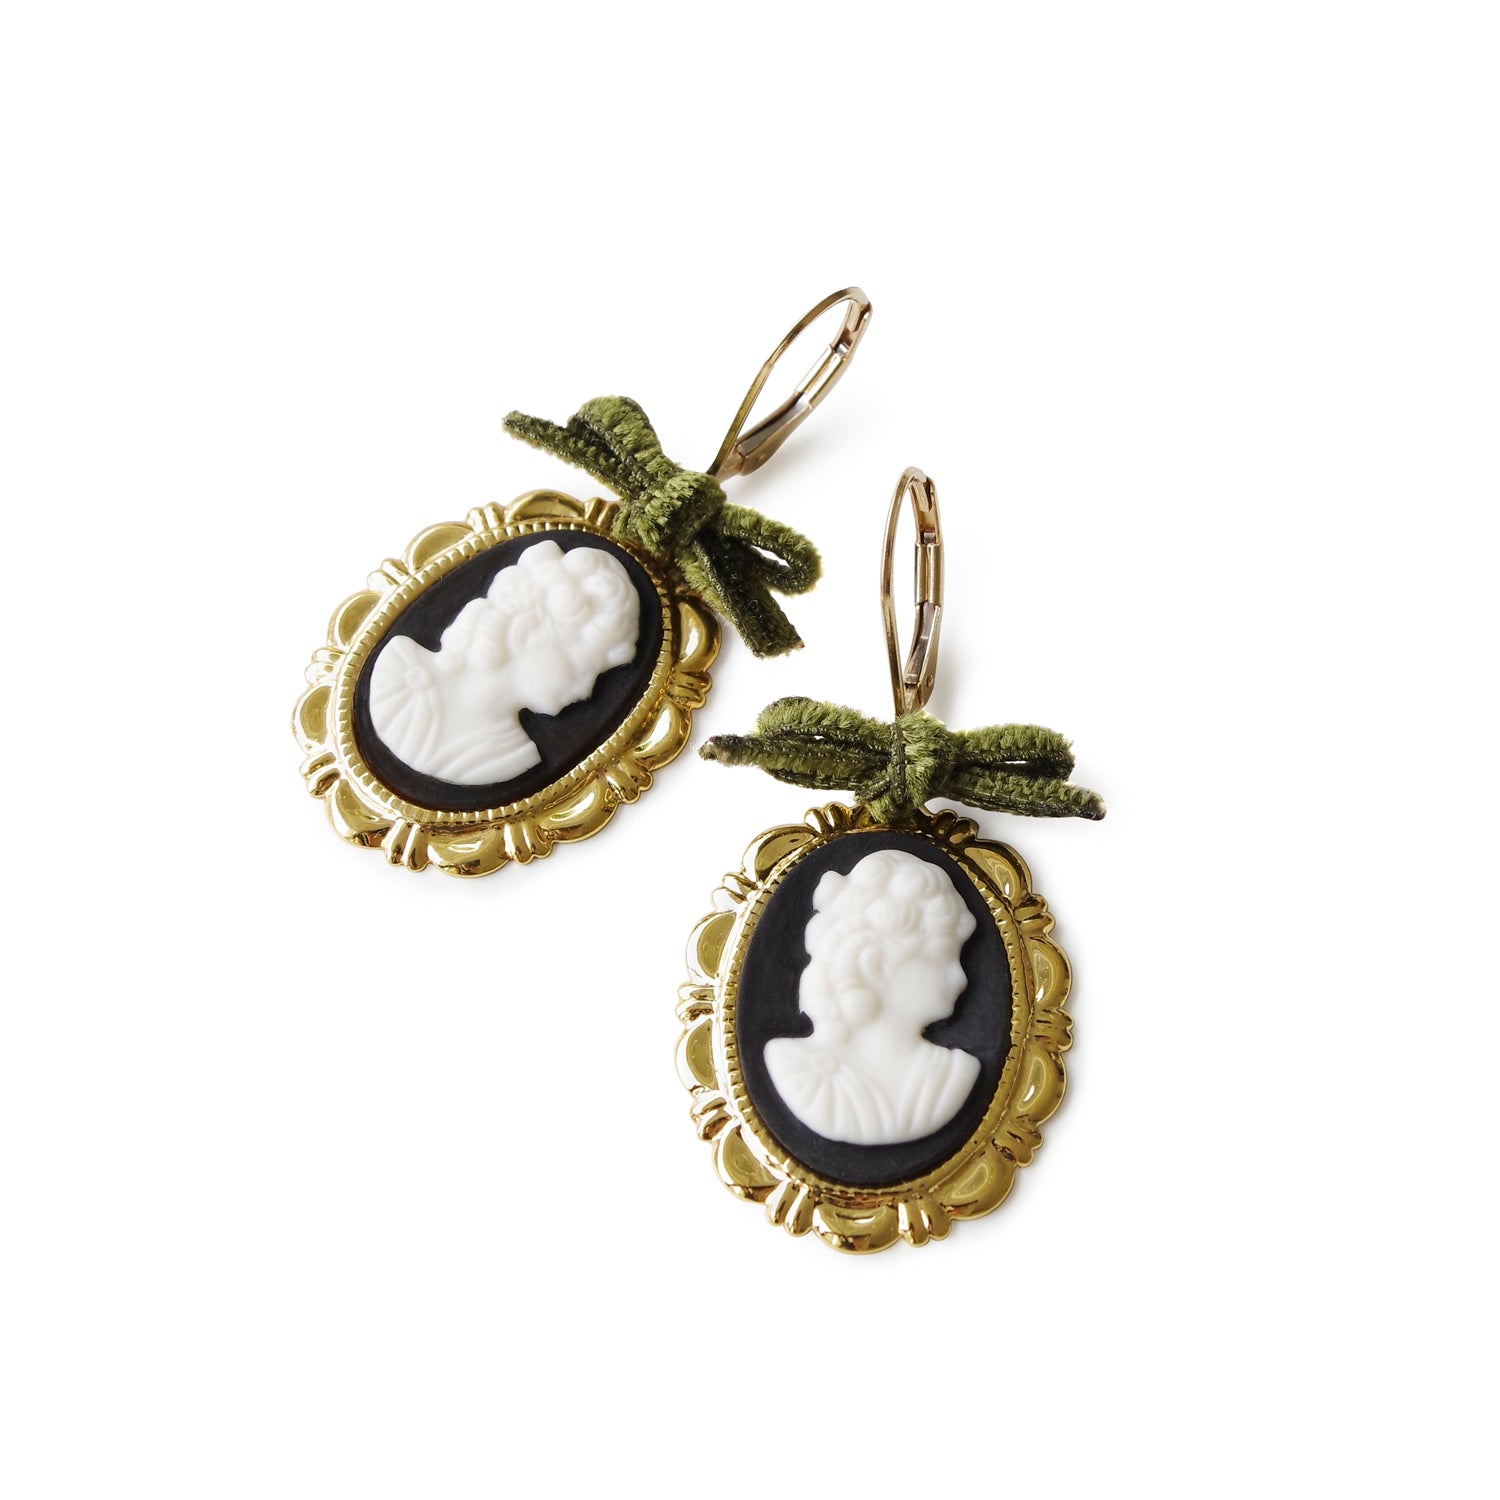 2012 Embossed Cameo Earrings | Authentic & Vintage | ReSEE